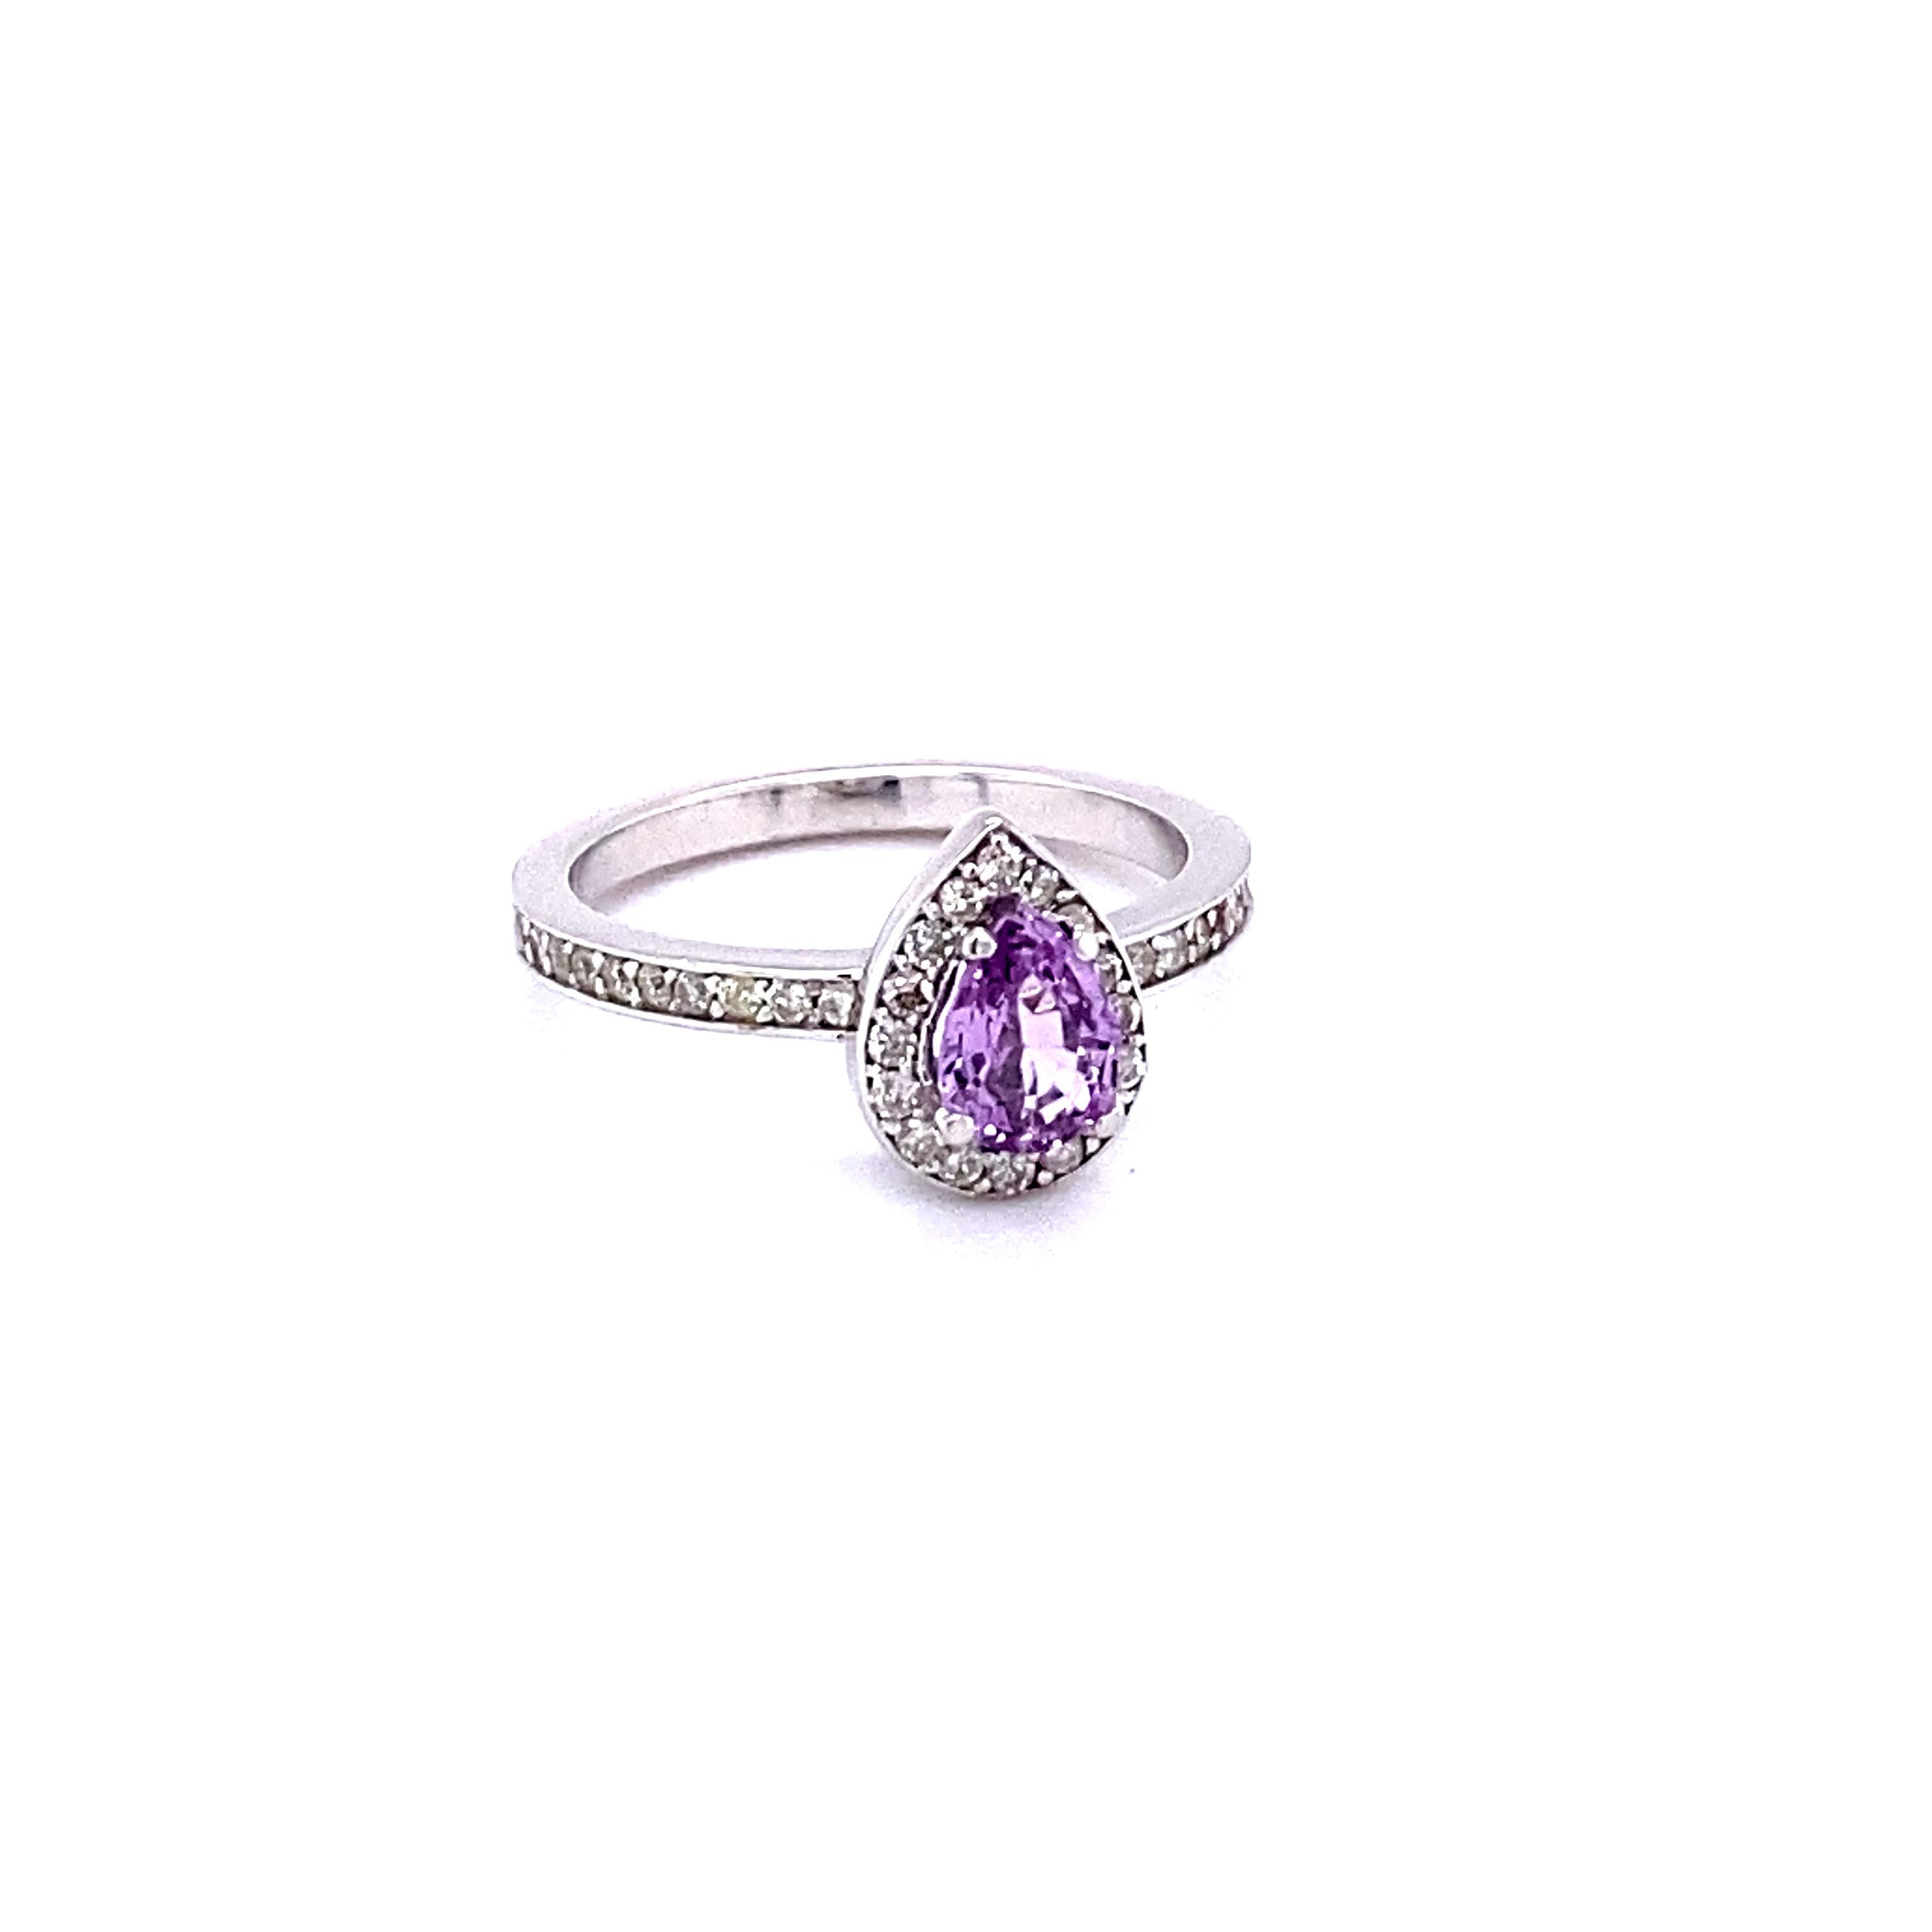 This beautiful ring has a 0.82 Carat Pear Cut Pink Sapphire and is surrounded by 37 Round Cut Diamonds that weigh 0.20 Carats. The total carat weight of the ring is 1.02 Carats. 

The ring is beautifully set in 14K White Gold with an approximate